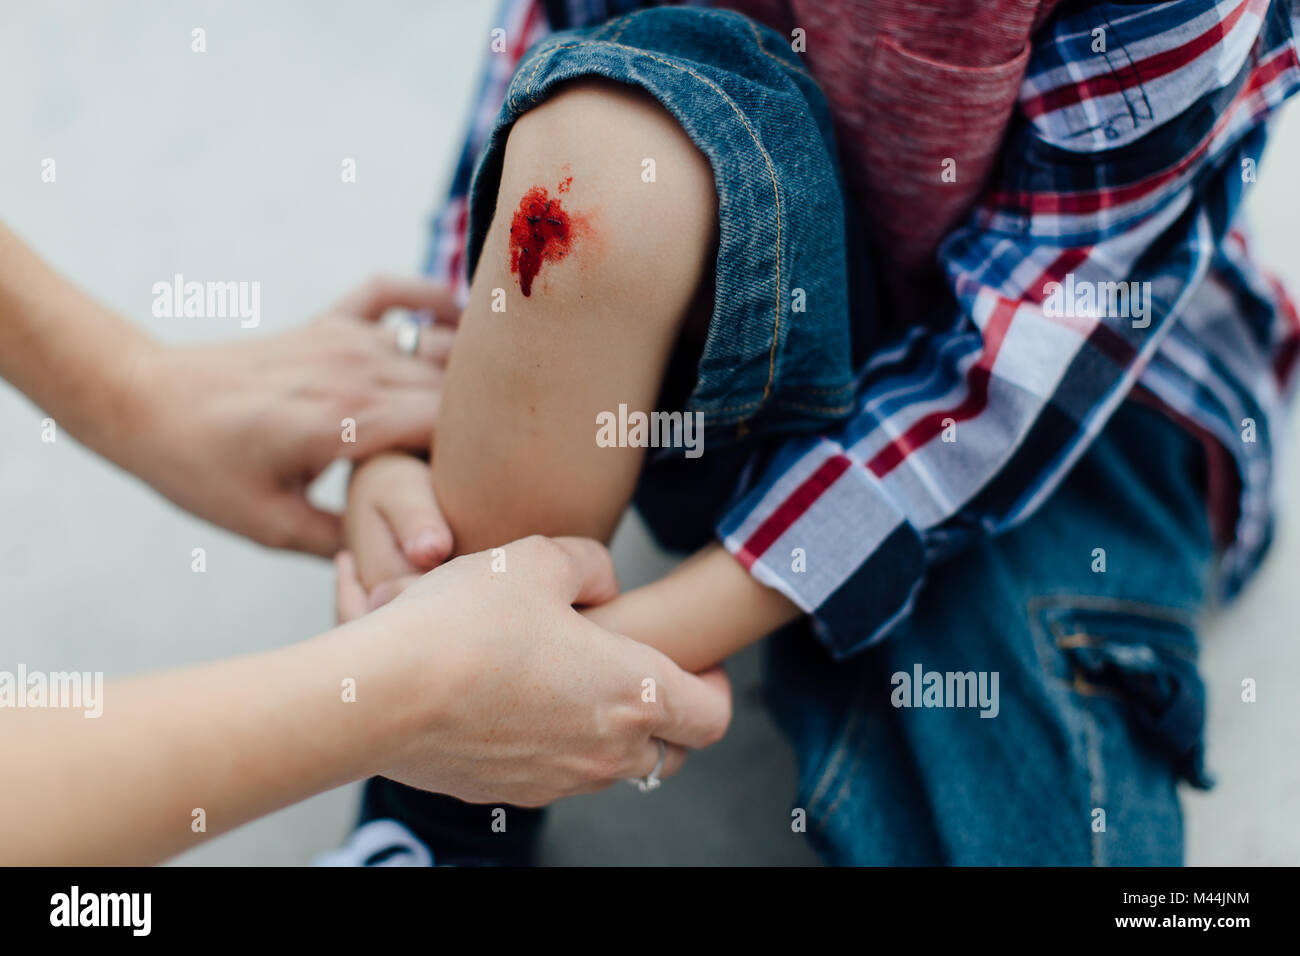 Mothers hands holding a little injured boy with a scraped knee Stock Photo